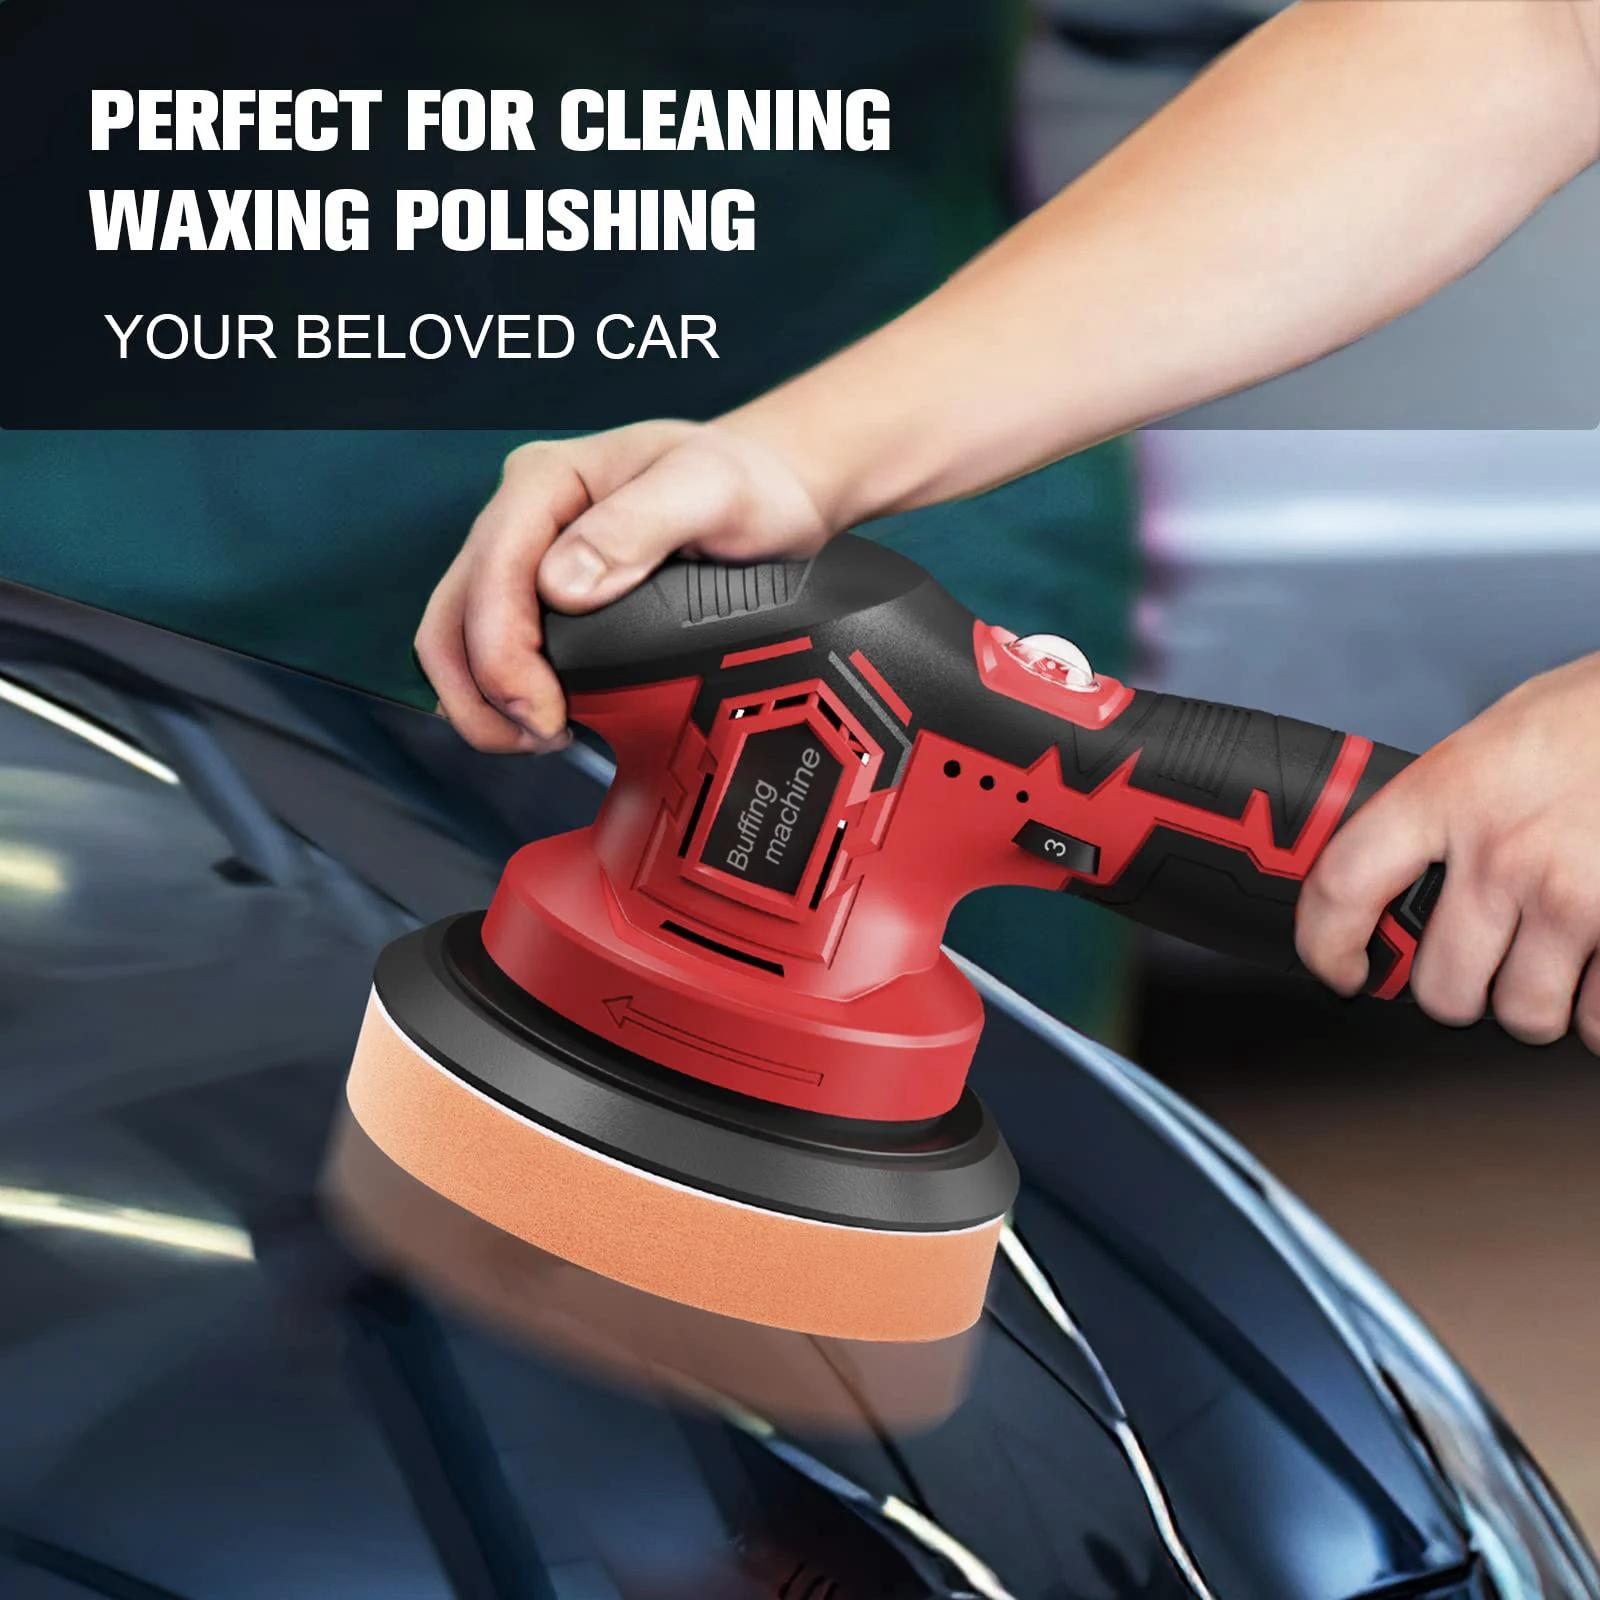 Can a Car Polisher Give You a Great Massage? — Self-Massage for